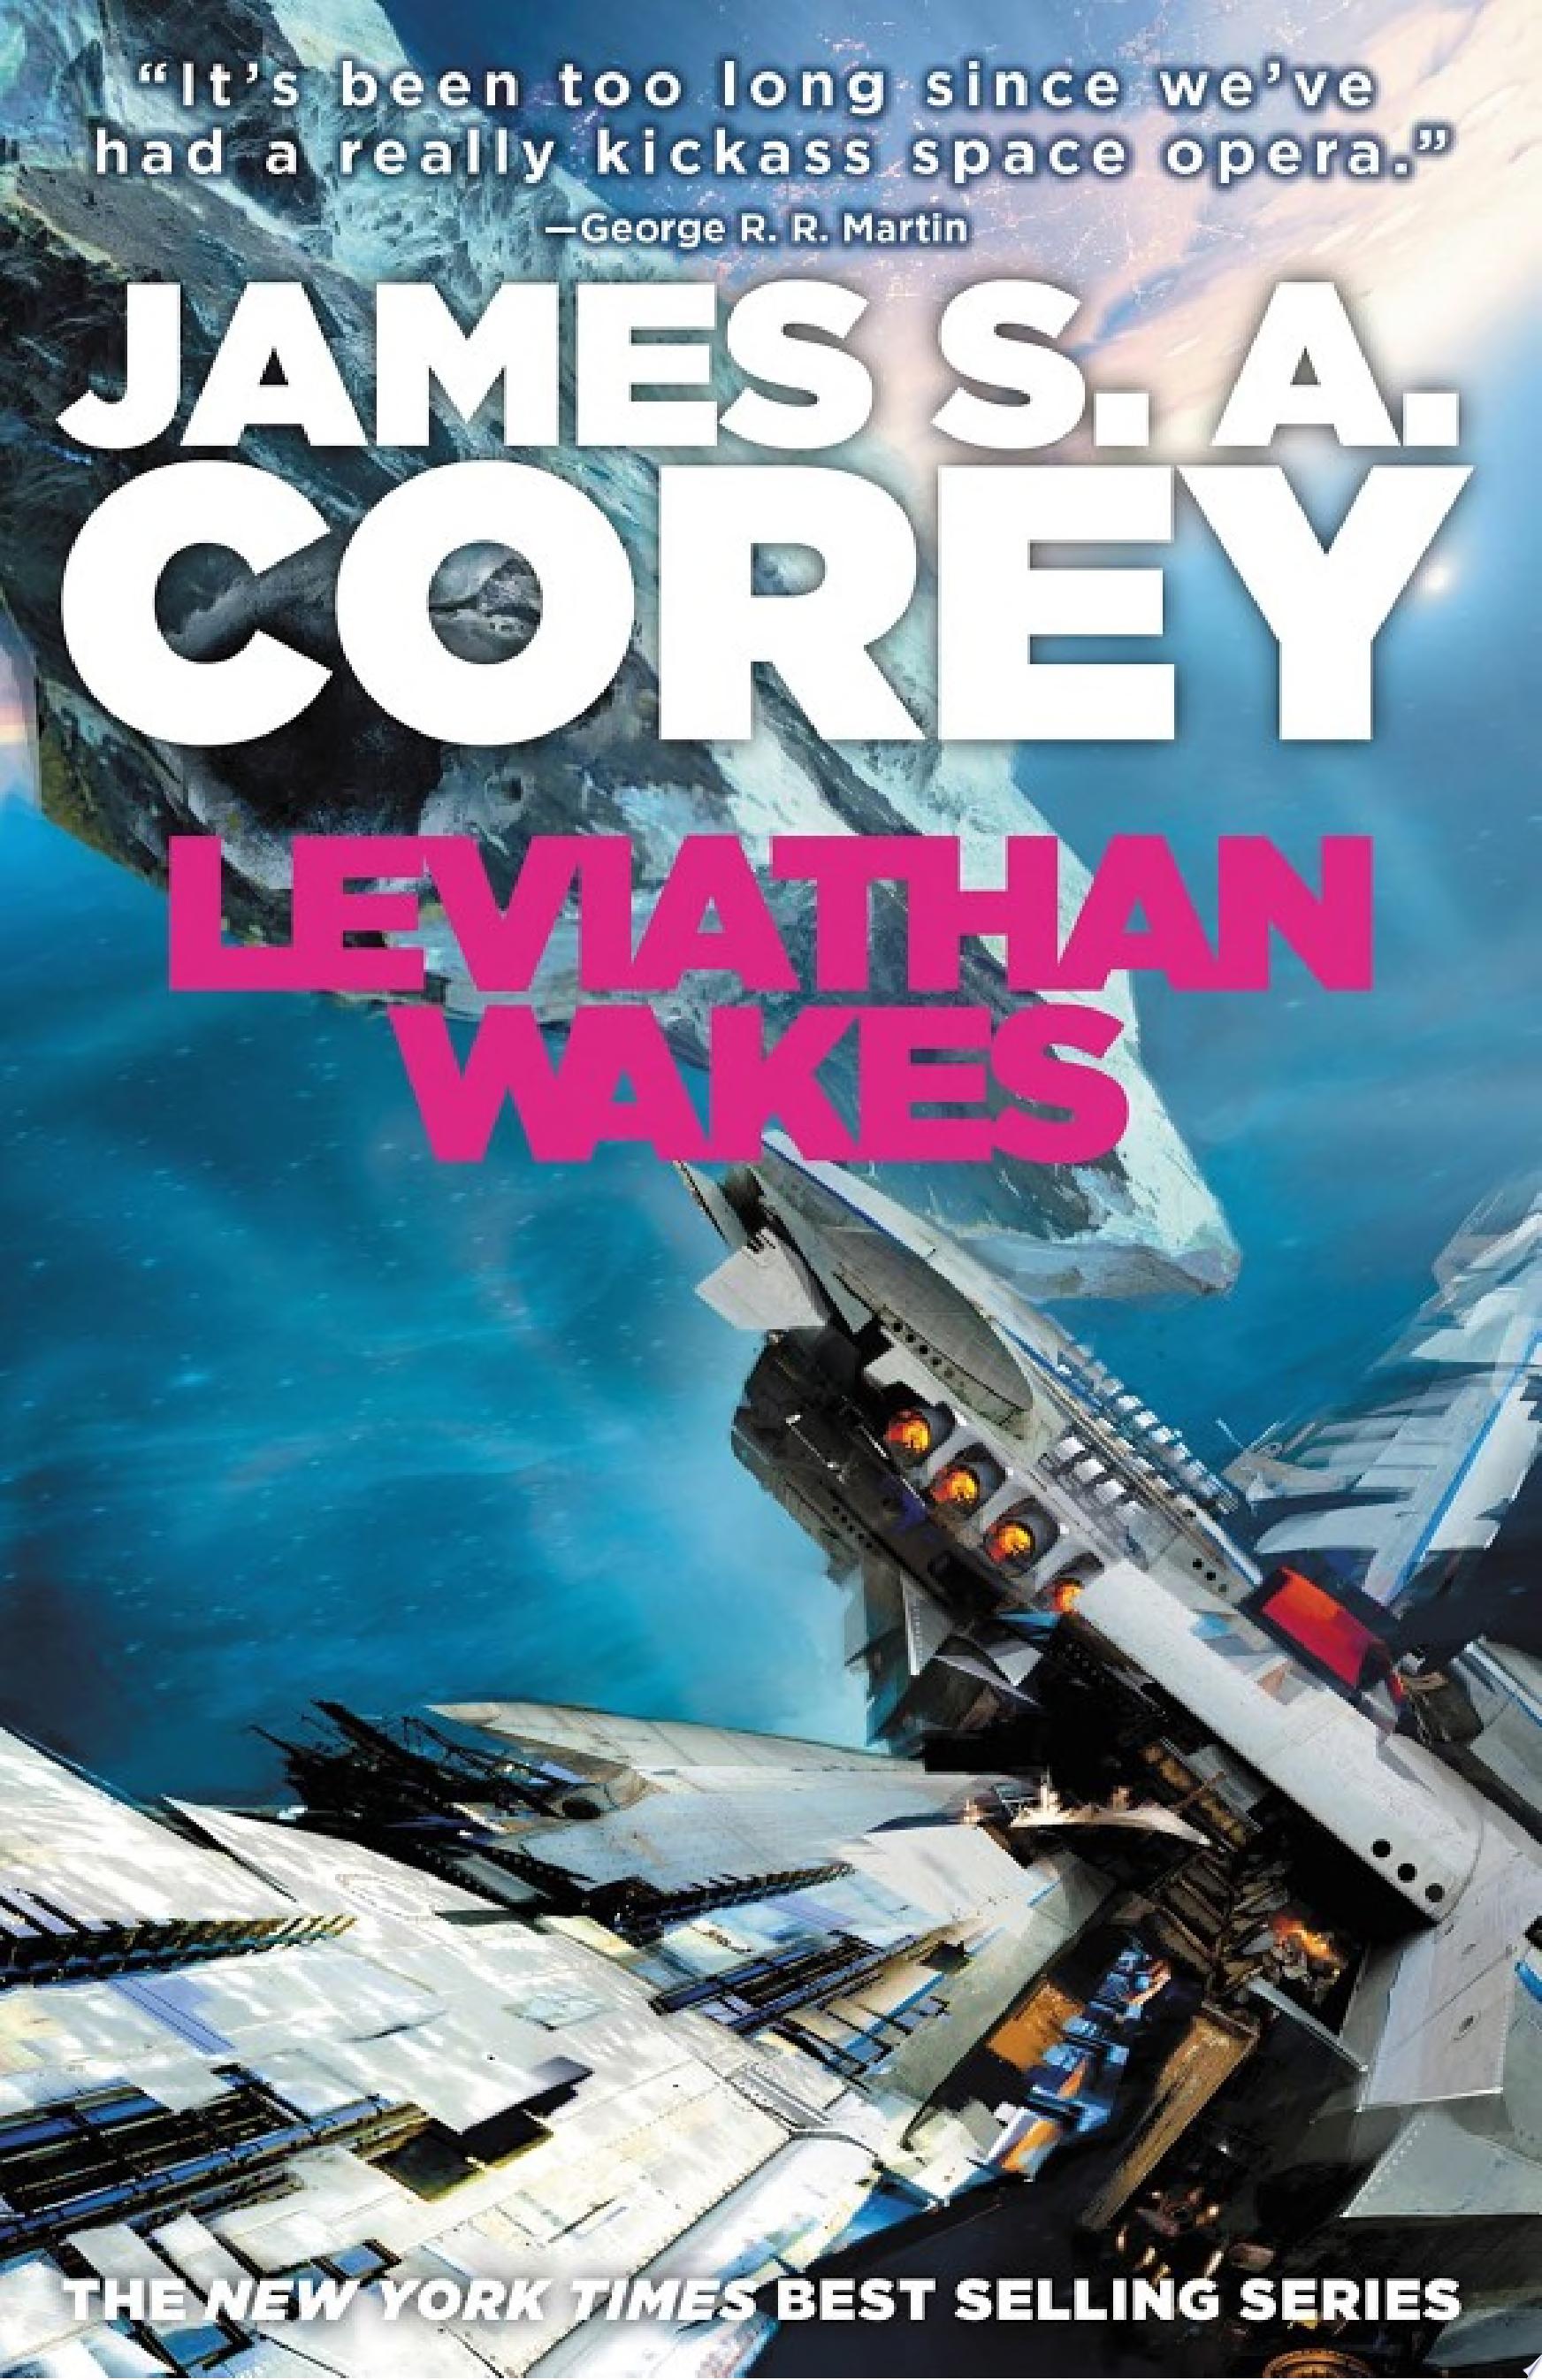 Image for "Leviathan Wakes"